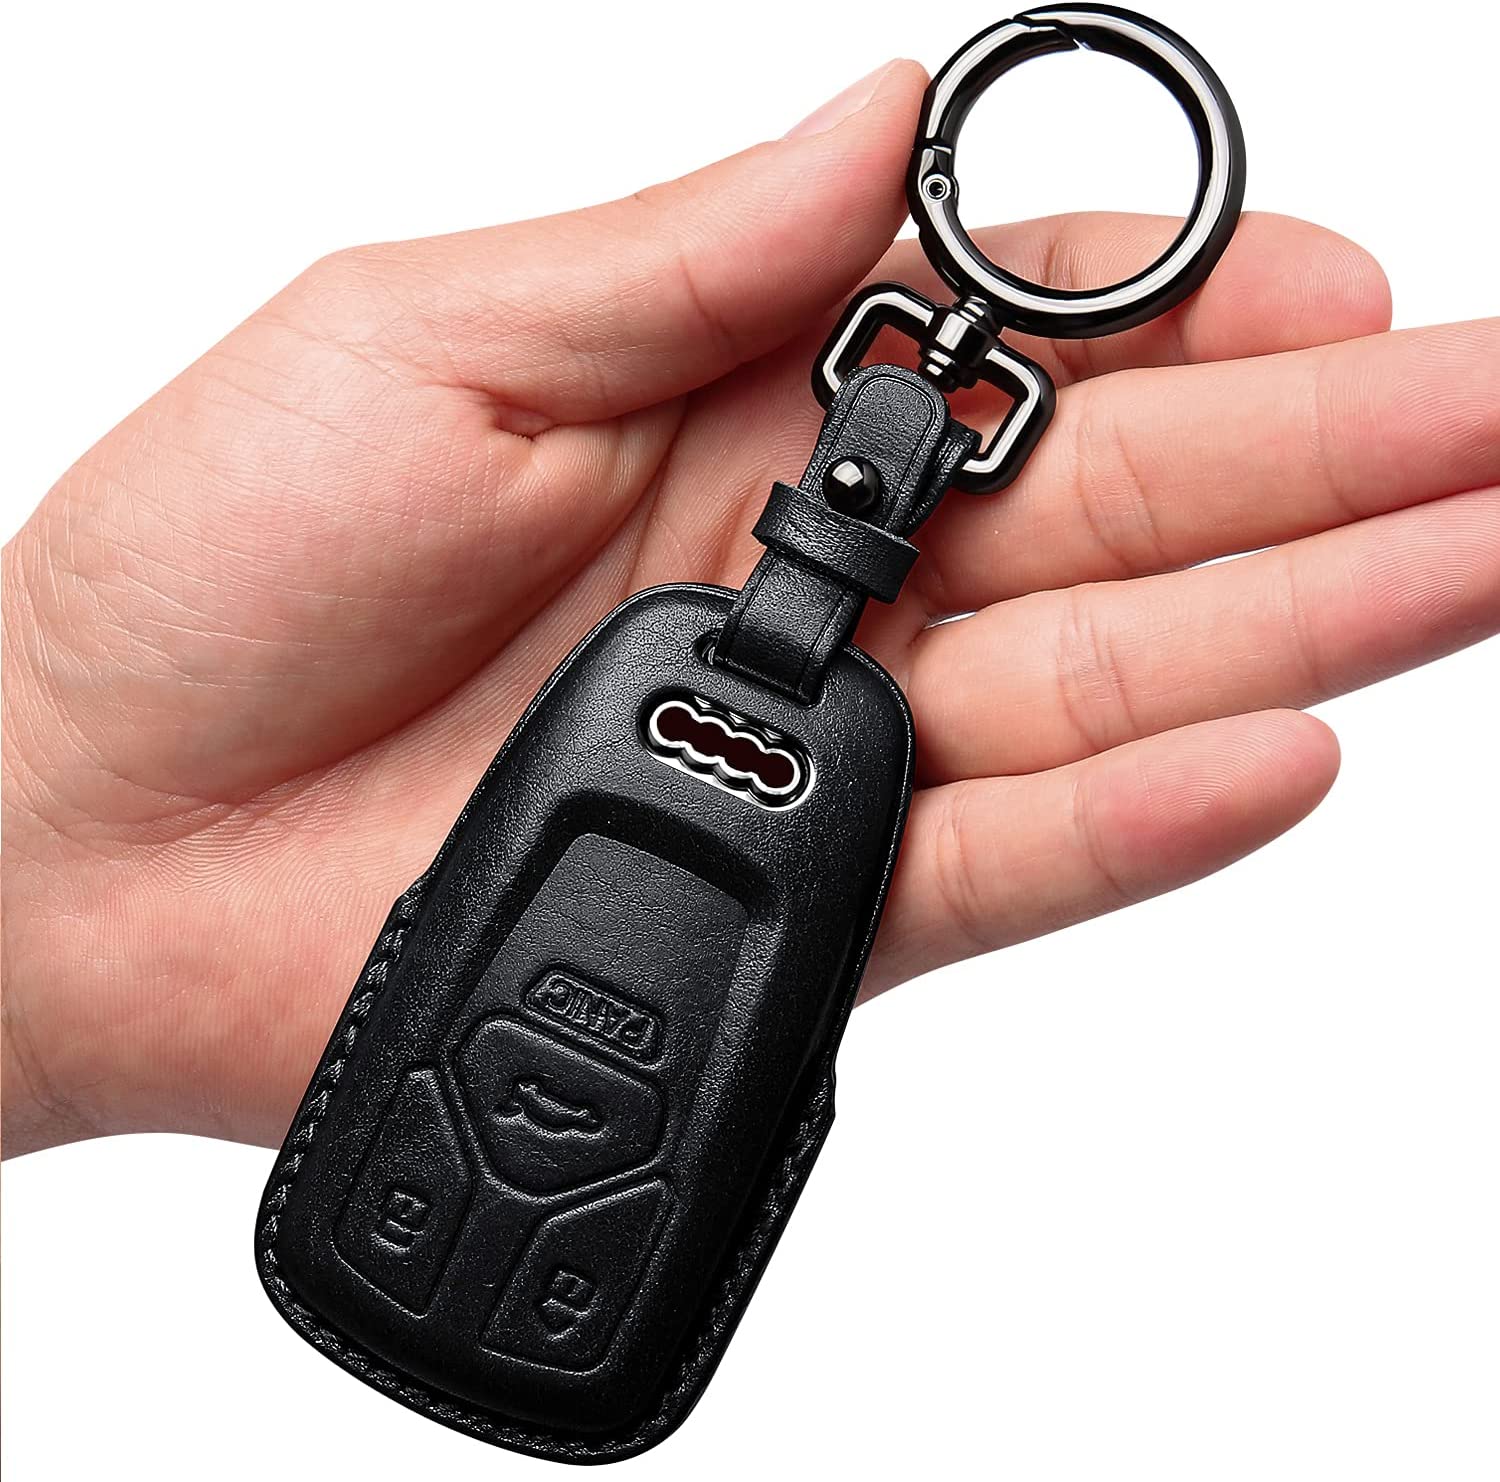 Audi Key Fob Cover Genuine Leather With Keychain,Leather Key Case Protector Compatible Audi A4 Q7 Q5 TT A3 A6 SQ5 R8 S5 smart key - Delicate Leather